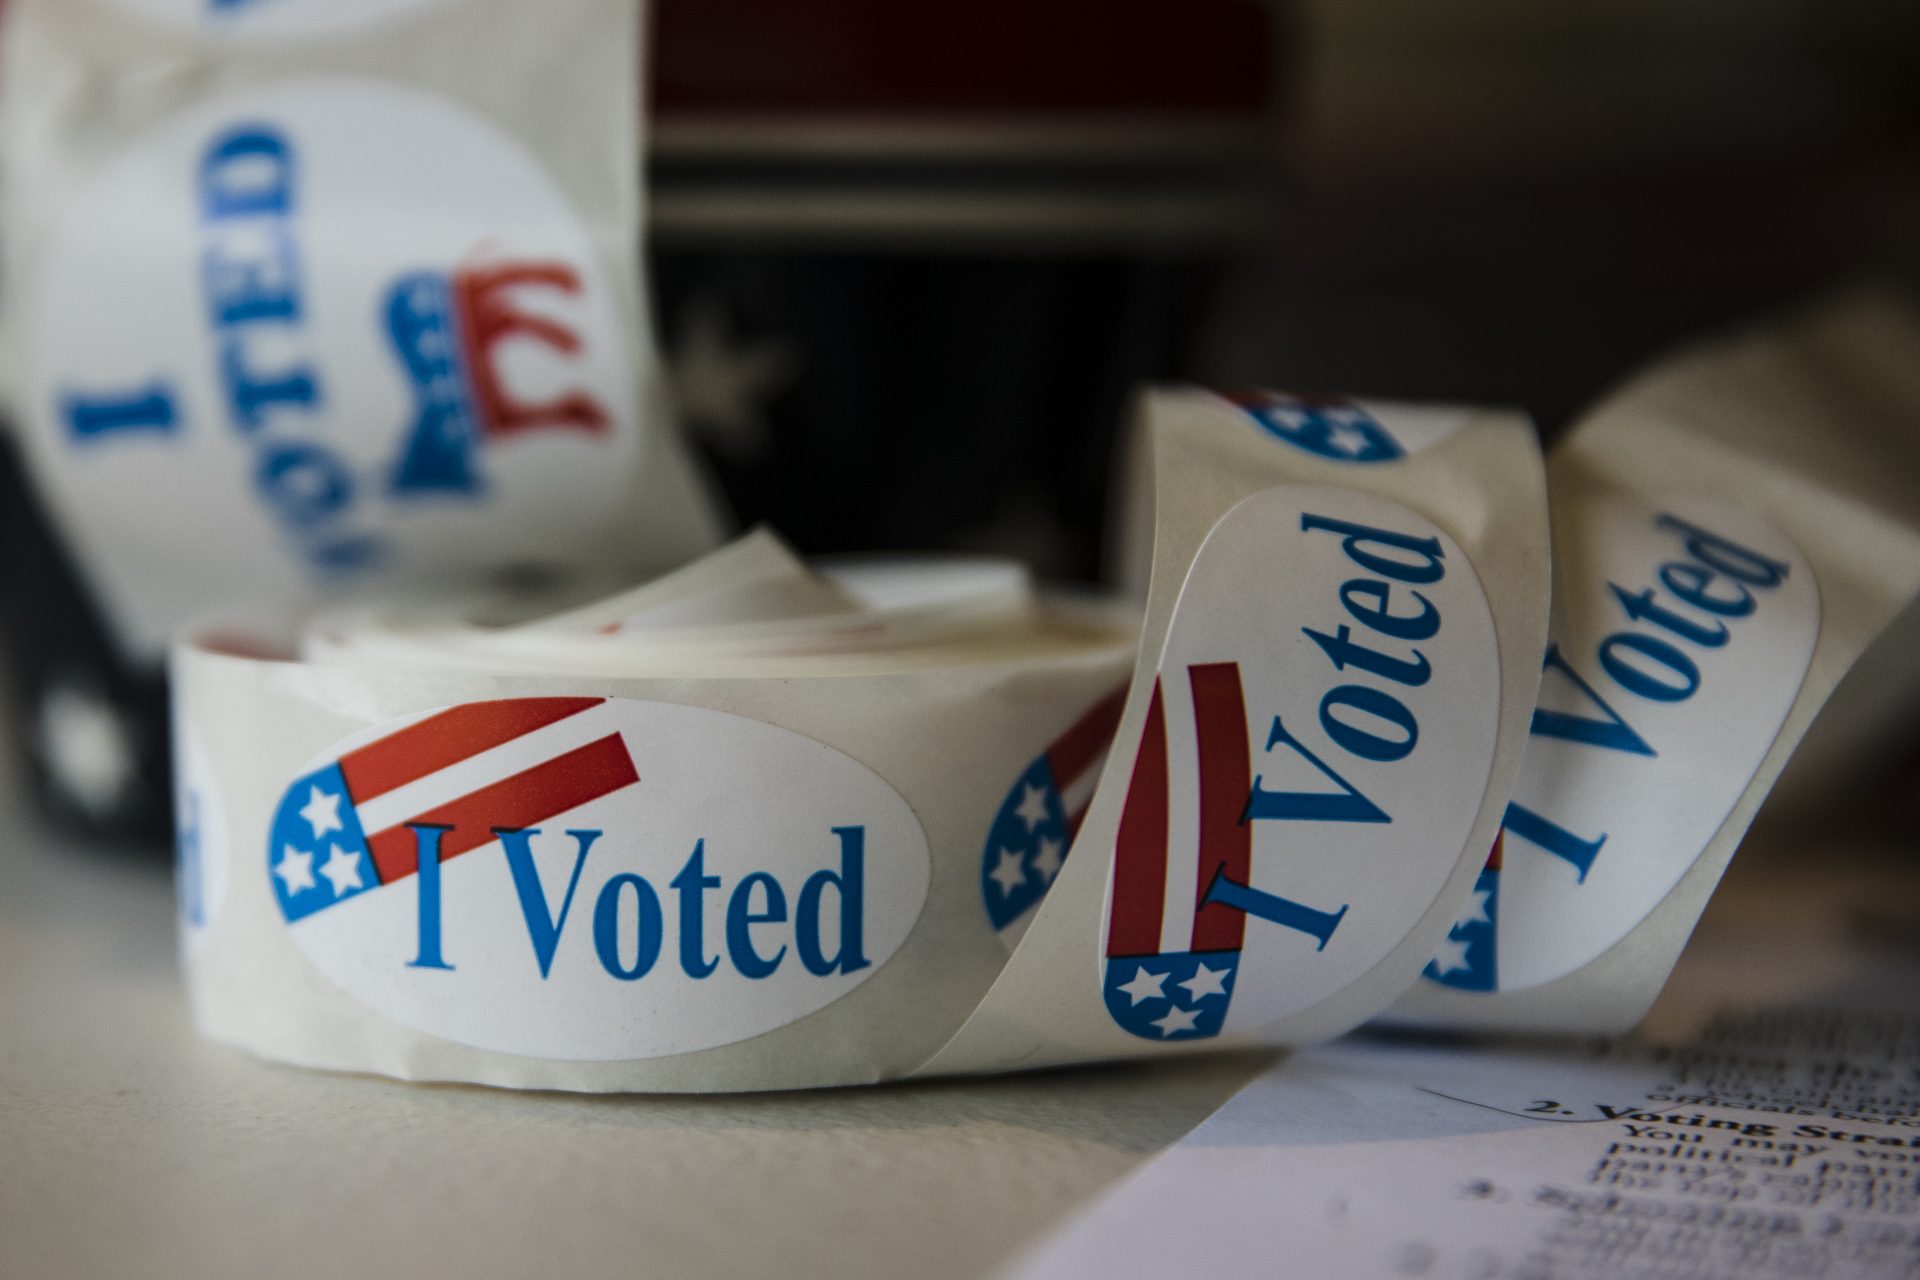 Stickers are placed out for voters at a polling place in Buckingham, Pa., Tuesday, Nov. 6, 2018.